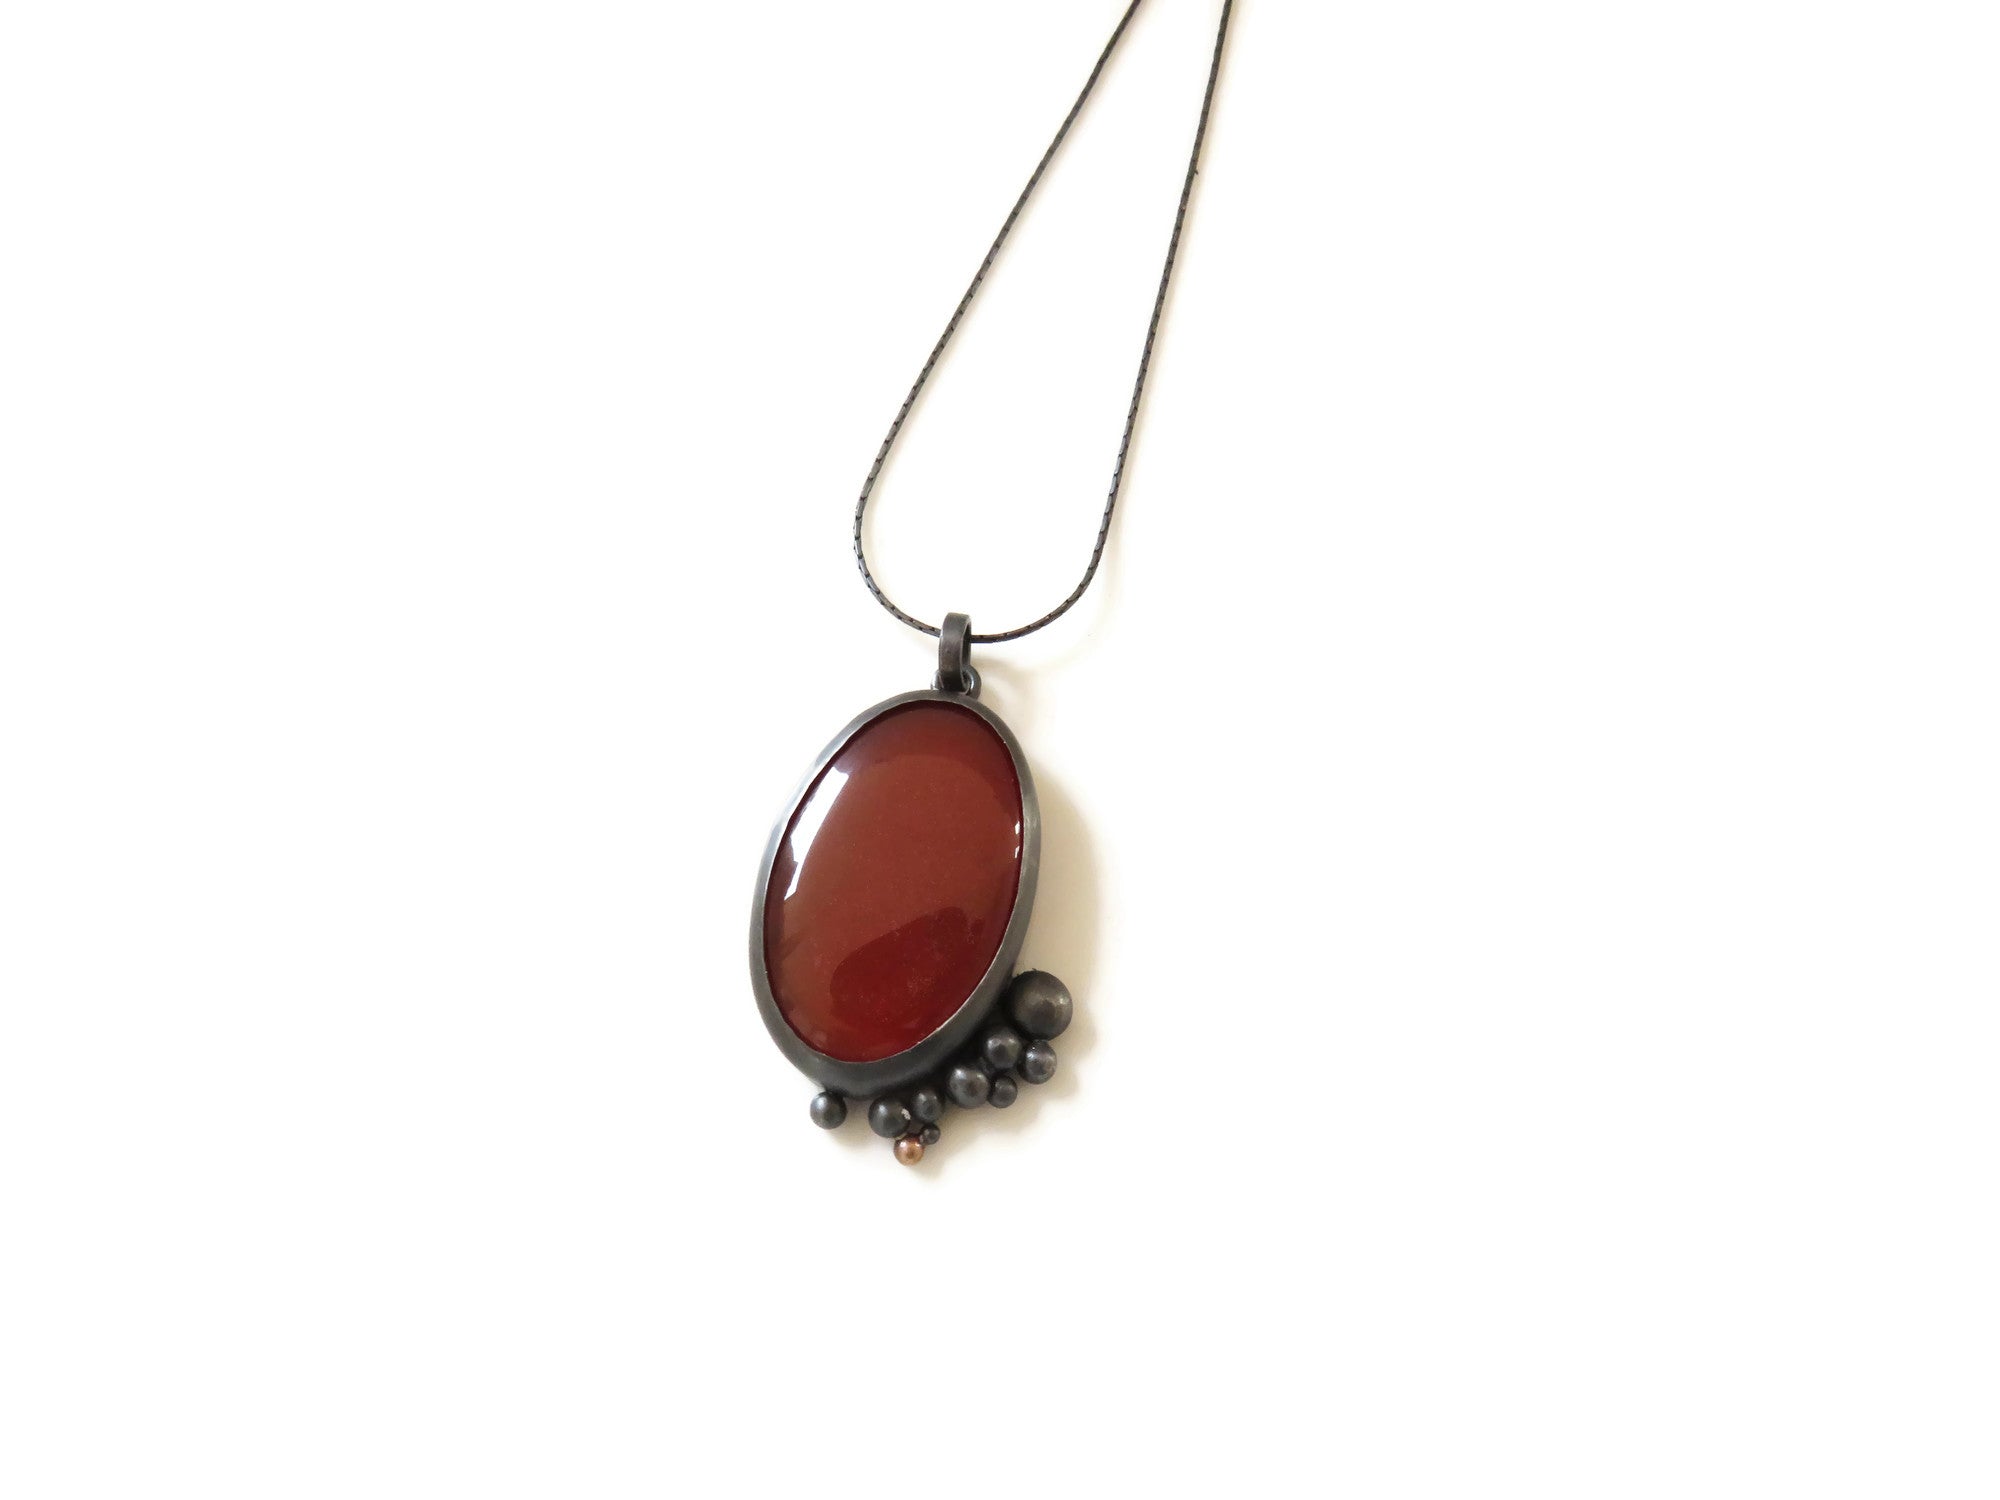 Carnelian Oxidized Silver and Gold Pendant